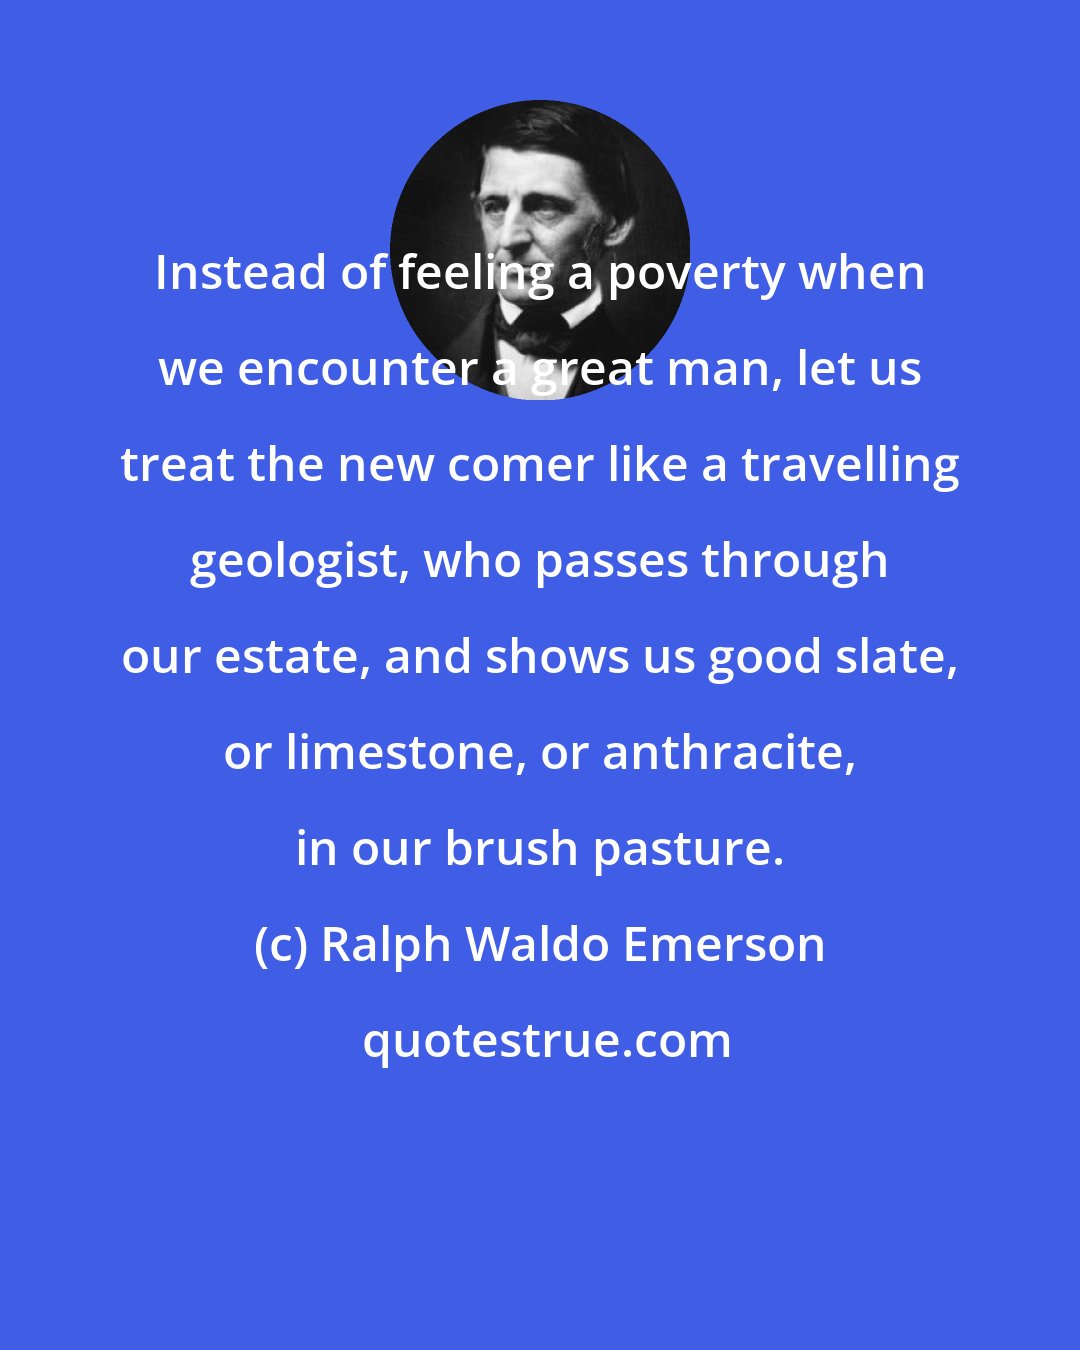 Ralph Waldo Emerson: Instead of feeling a poverty when we encounter a great man, let us treat the new comer like a travelling geologist, who passes through our estate, and shows us good slate, or limestone, or anthracite, in our brush pasture.